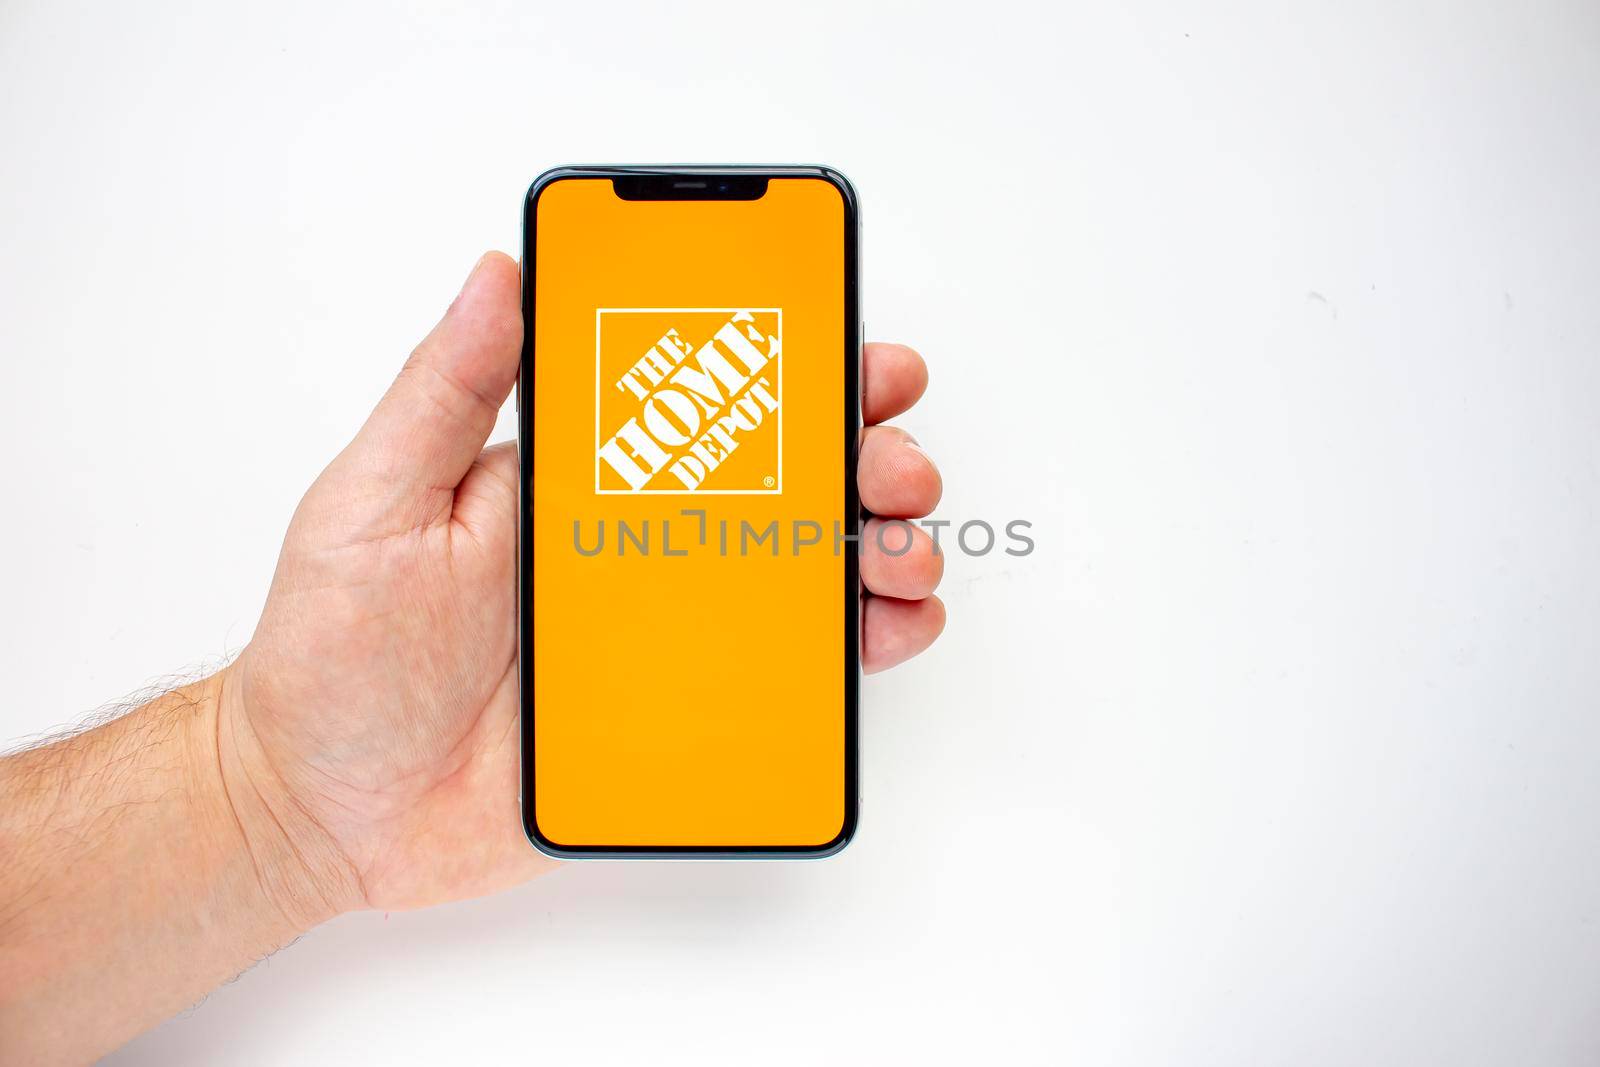 Calgary, Alberta, Canada. Aug 15, 2020. A person holding an iPhone 11 Pro Max with the Home Depot App by oasisamuel